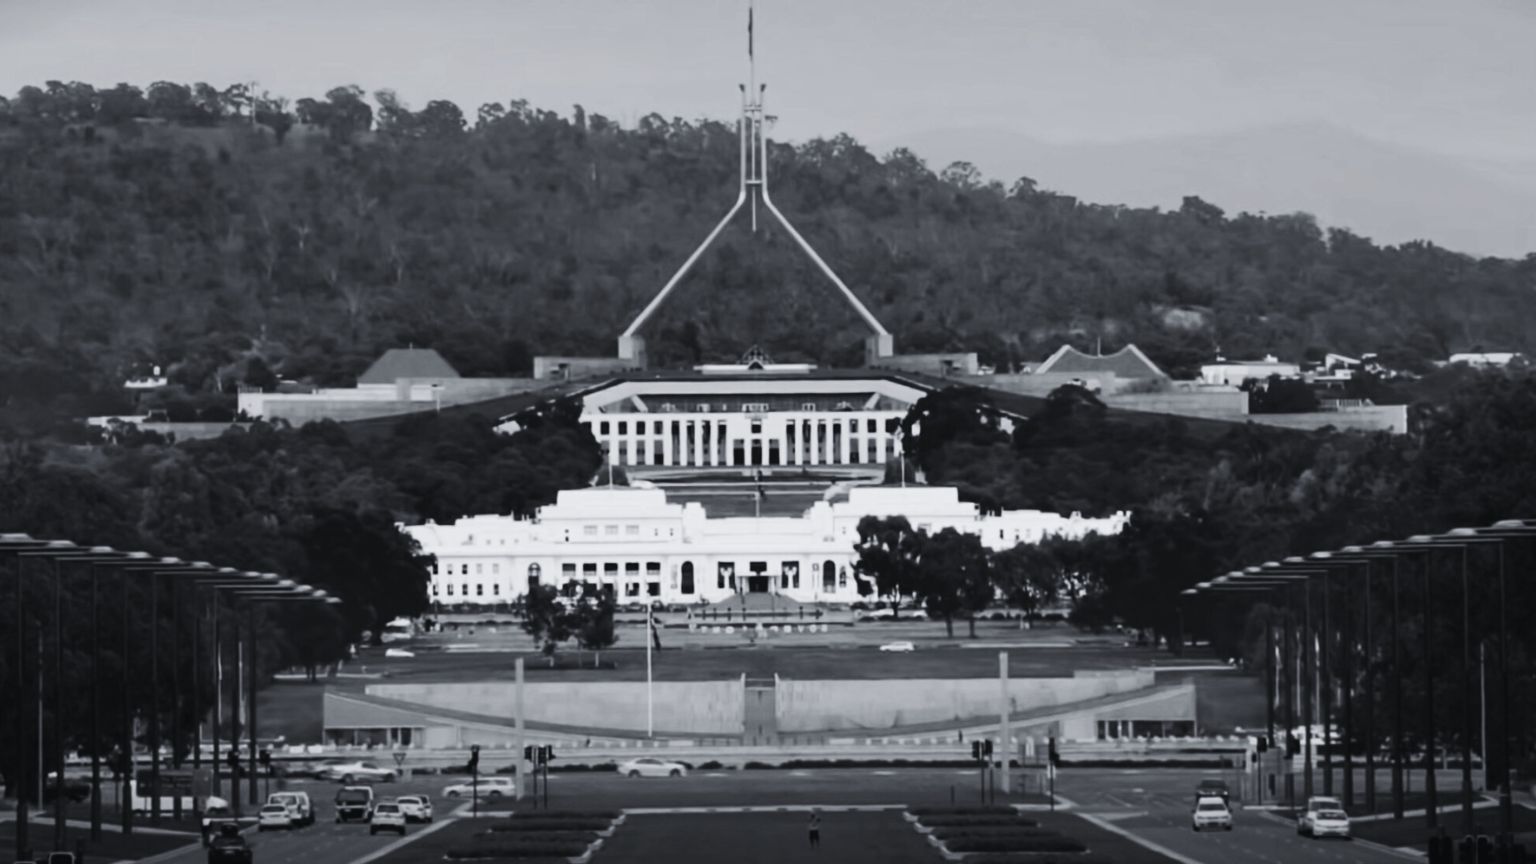 Australian government blocked websites with “informal” requests, meaning takedown requests went unrecorded